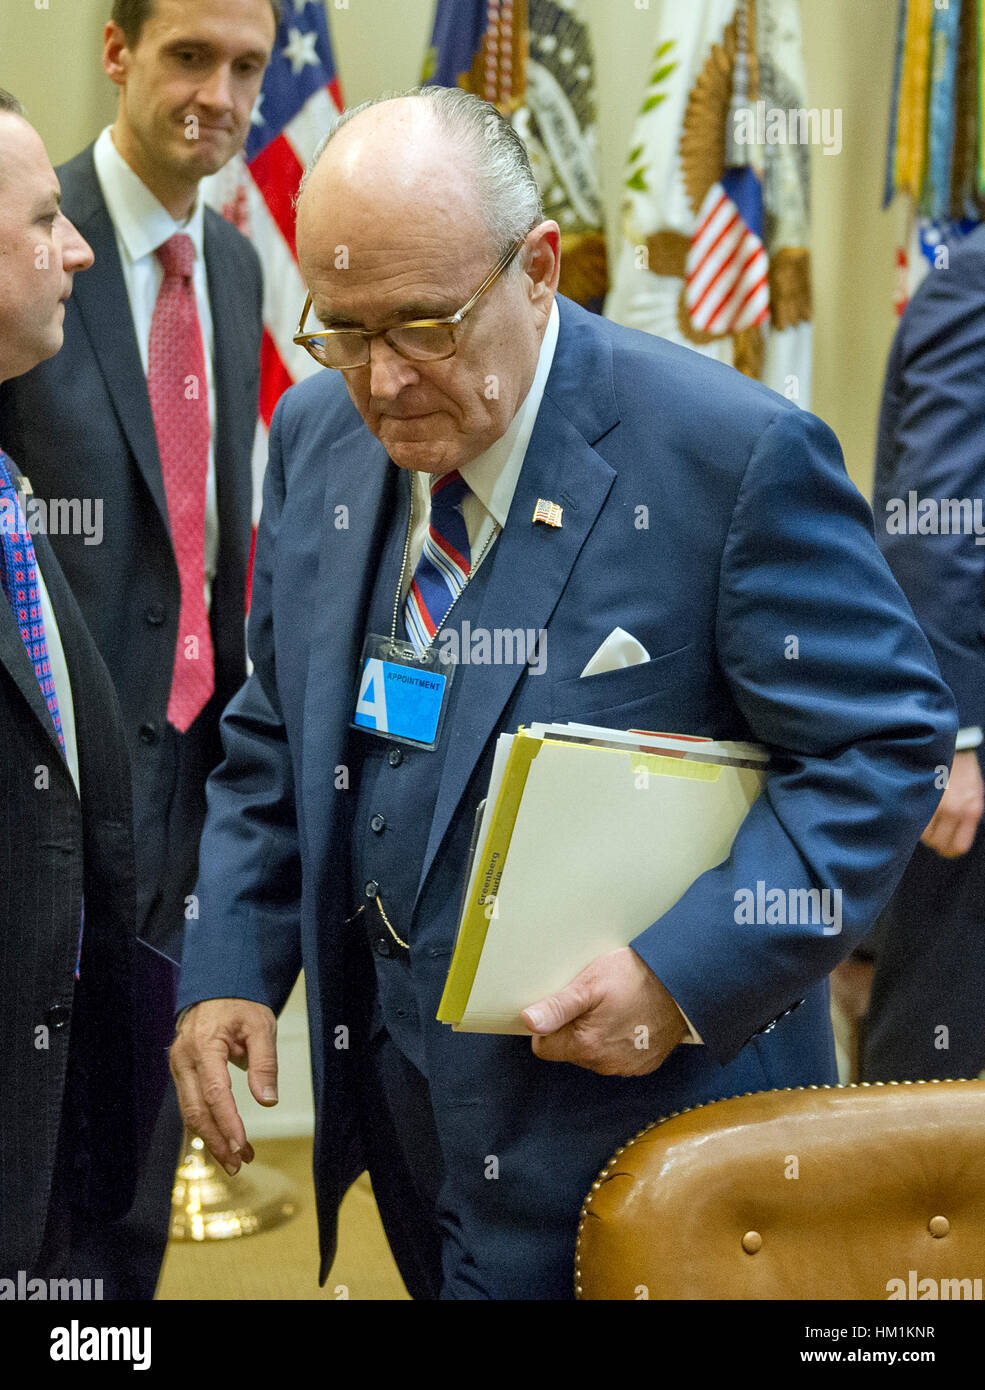 Former Mayor Rudy Giuliani (Republican of New York) arrives for the meeting as Washington, DC. 31st Jan, 2017. United States President Donald Trump holds a listening session with cyber security experts in the in the Roosevelt Room of the White House in Washington, DC. Credit: Ron Sachs/Pool via CNP /MediaPunch/Alamy Live News  Stock Photo